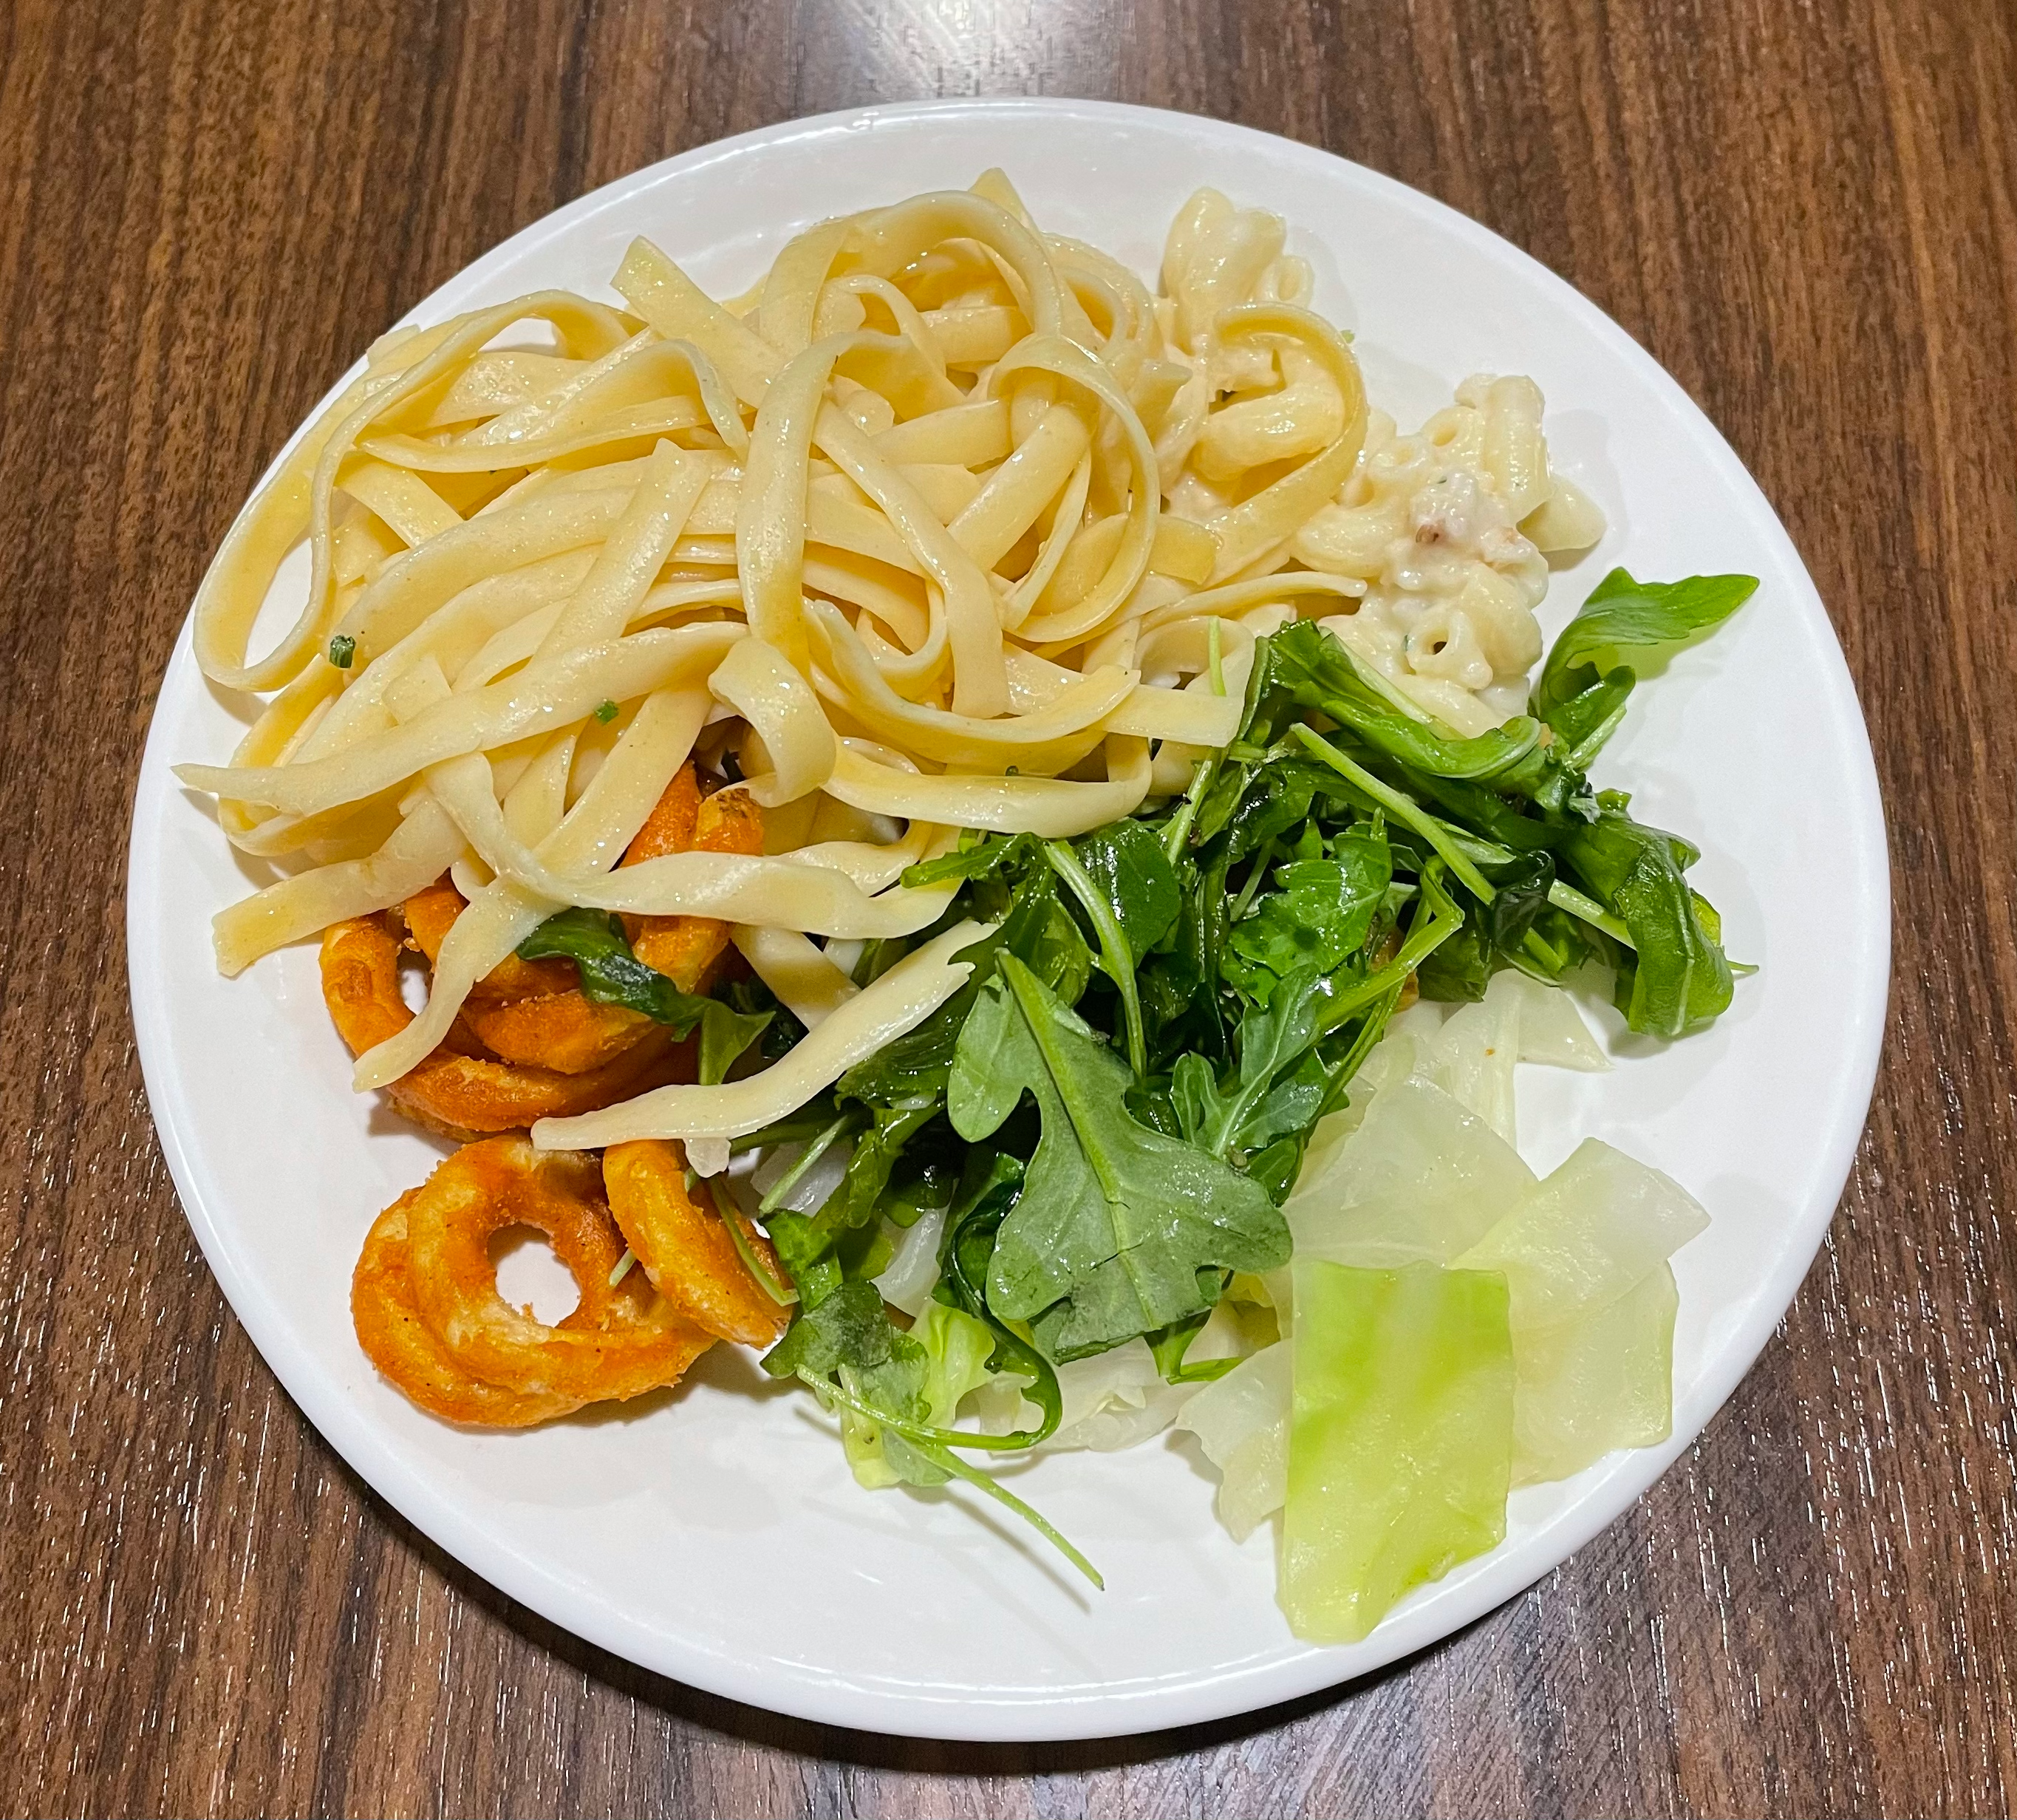 Shrimp scampi with pasta, white truffle macaroni, curly fries, butter cabbage, and arugula salad